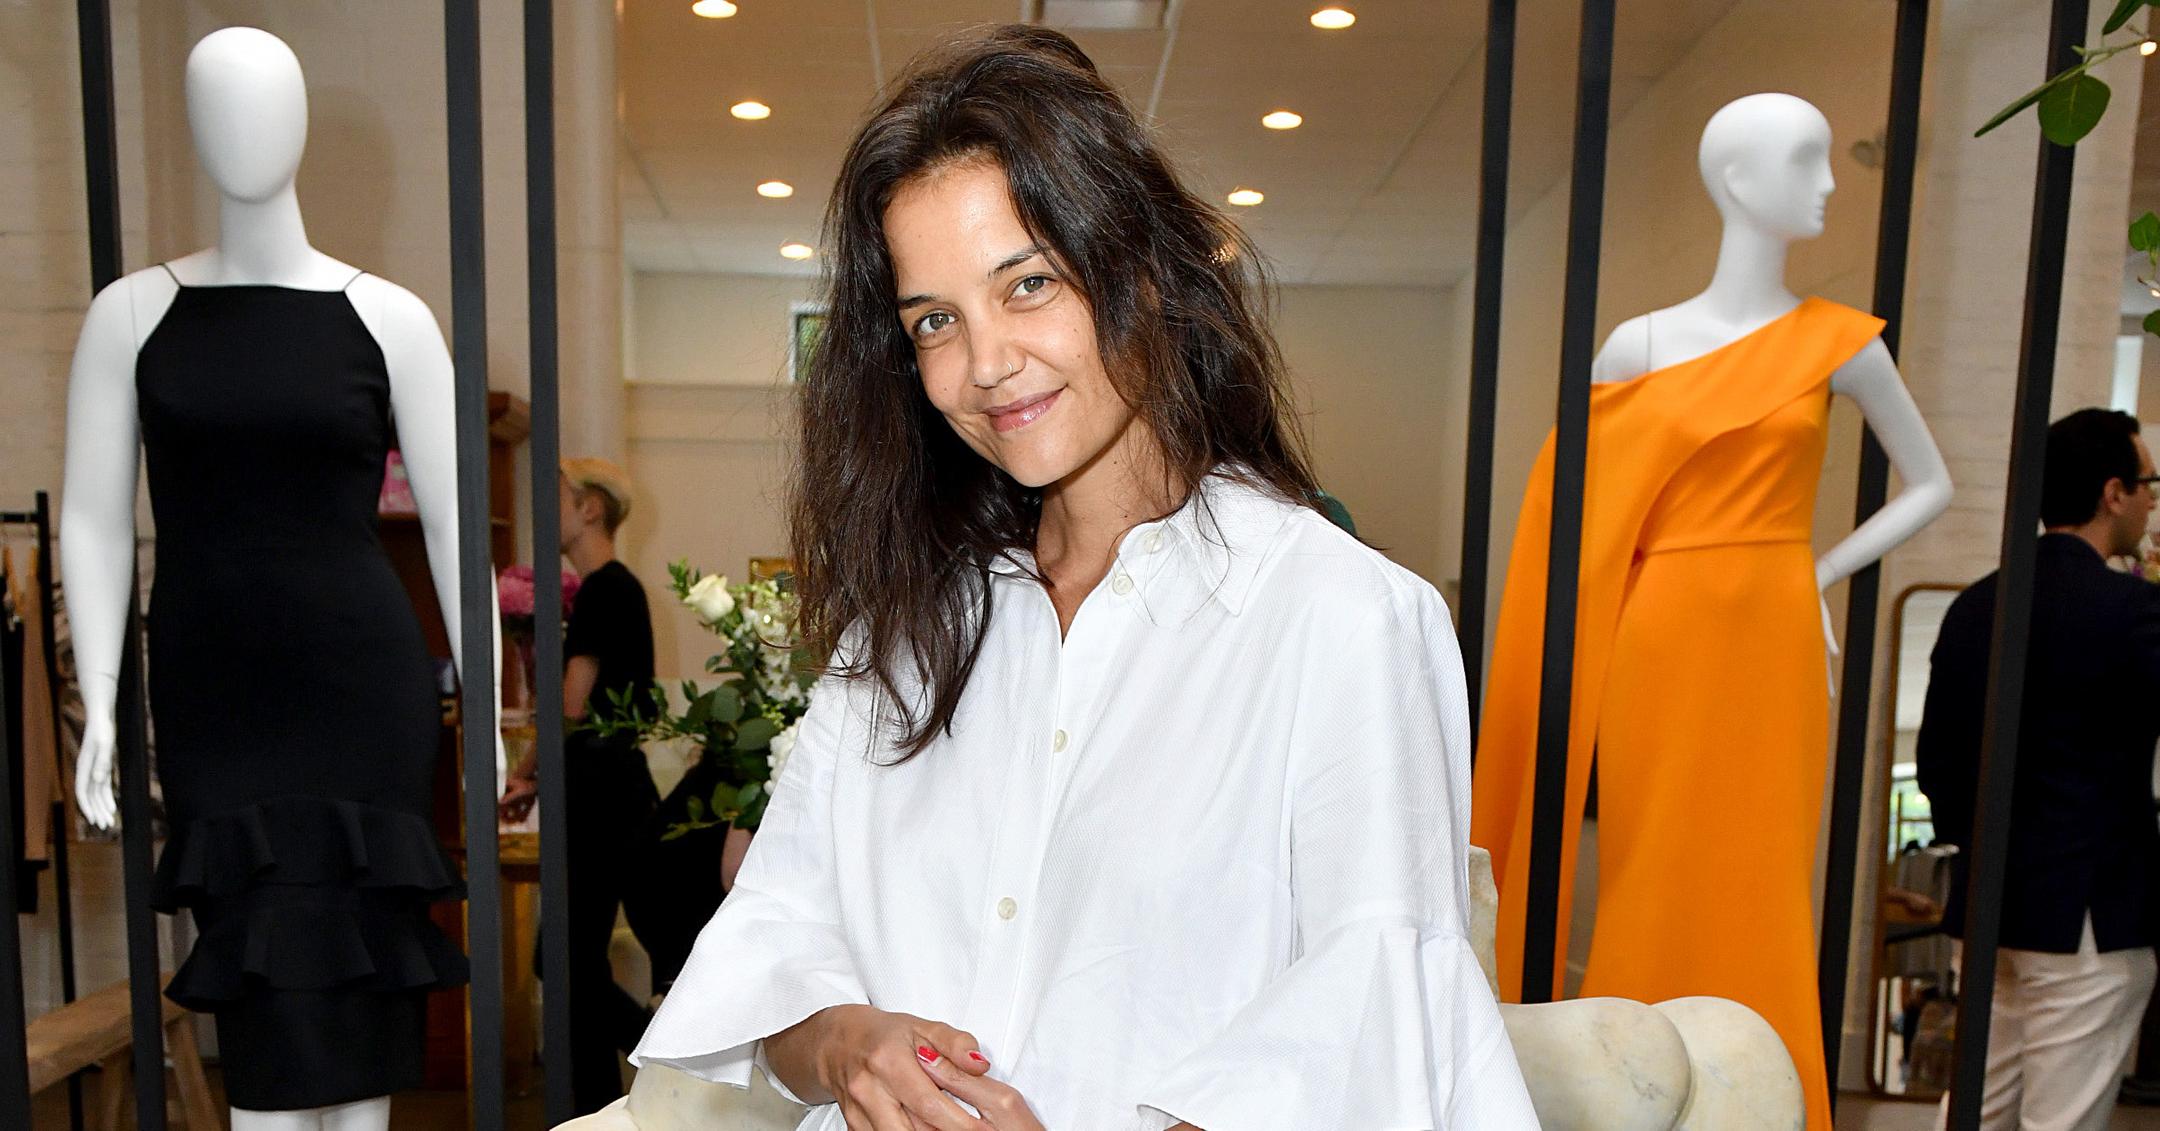 Why Did Katie Holmes Leave the 'Batman' Movies?